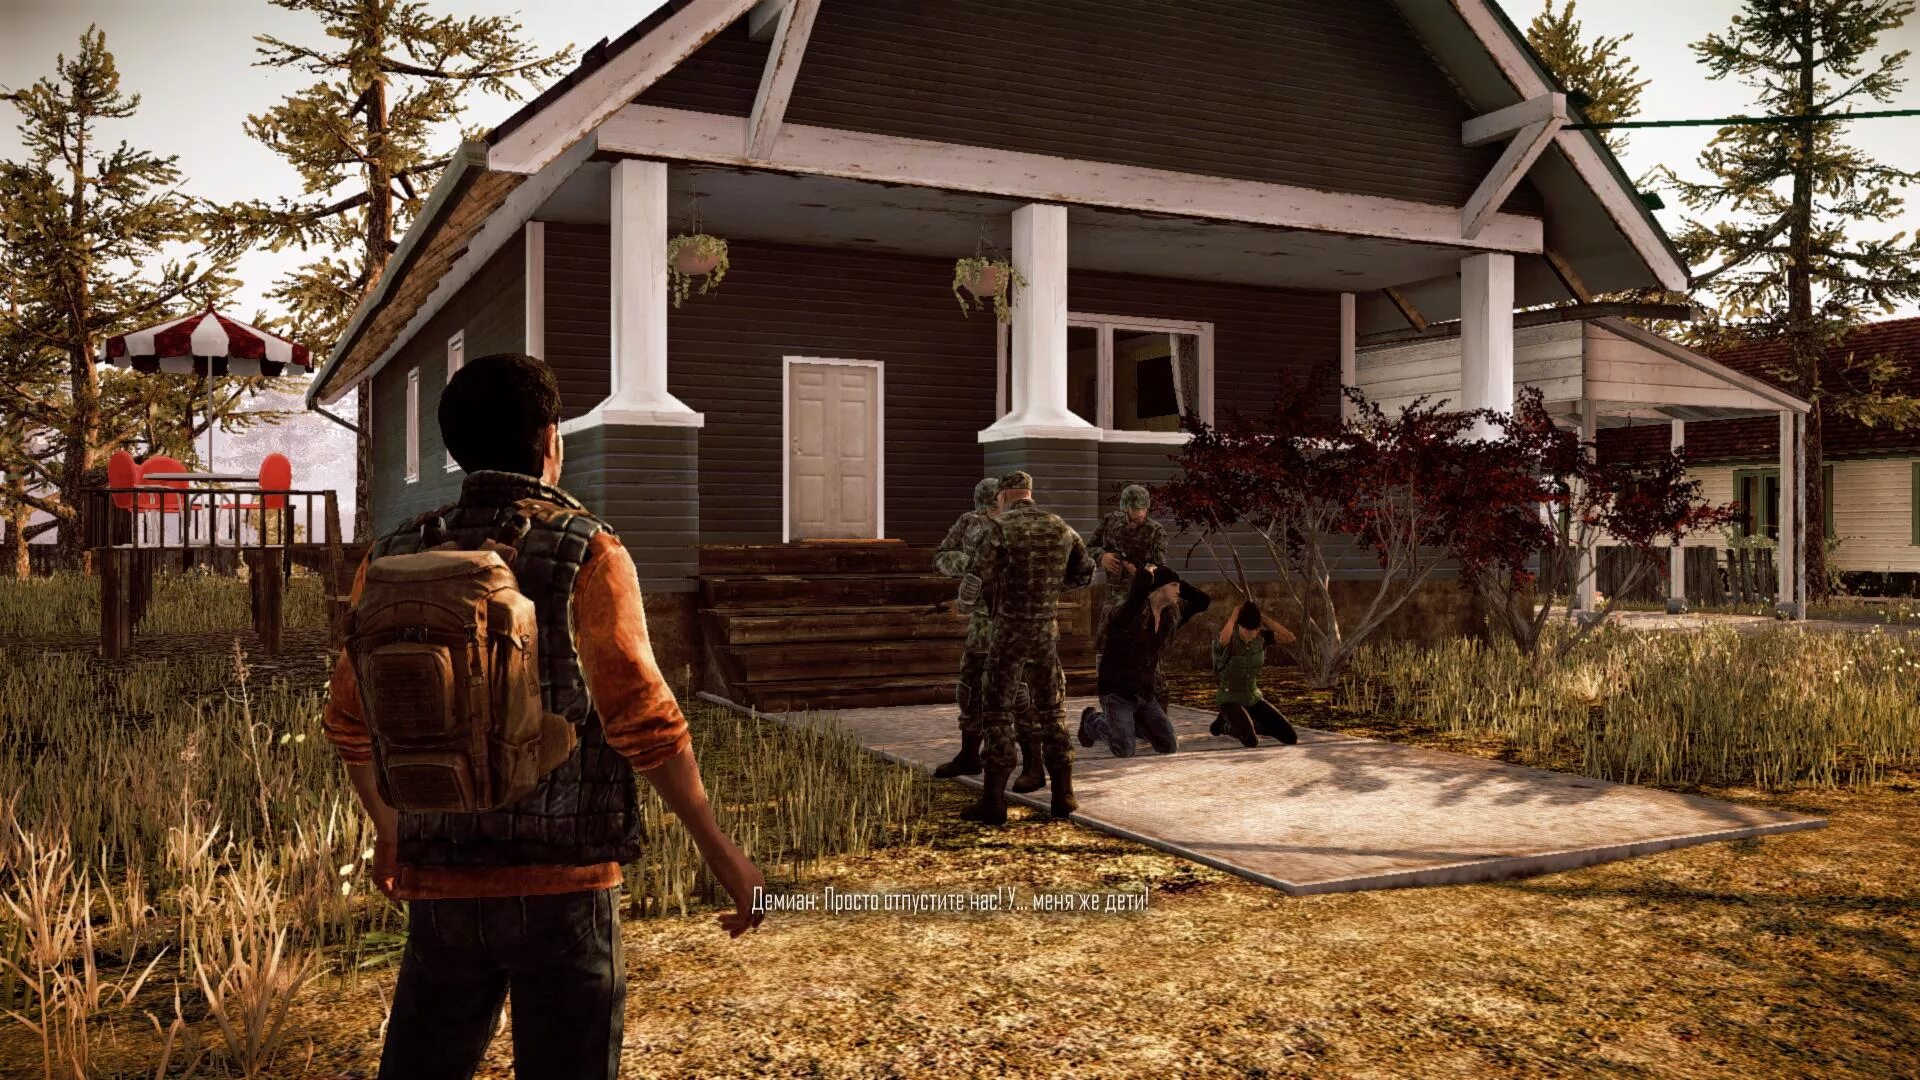 State of Decay. State of Decay 1. Игра State of Decay. Игра State of Decay 2.